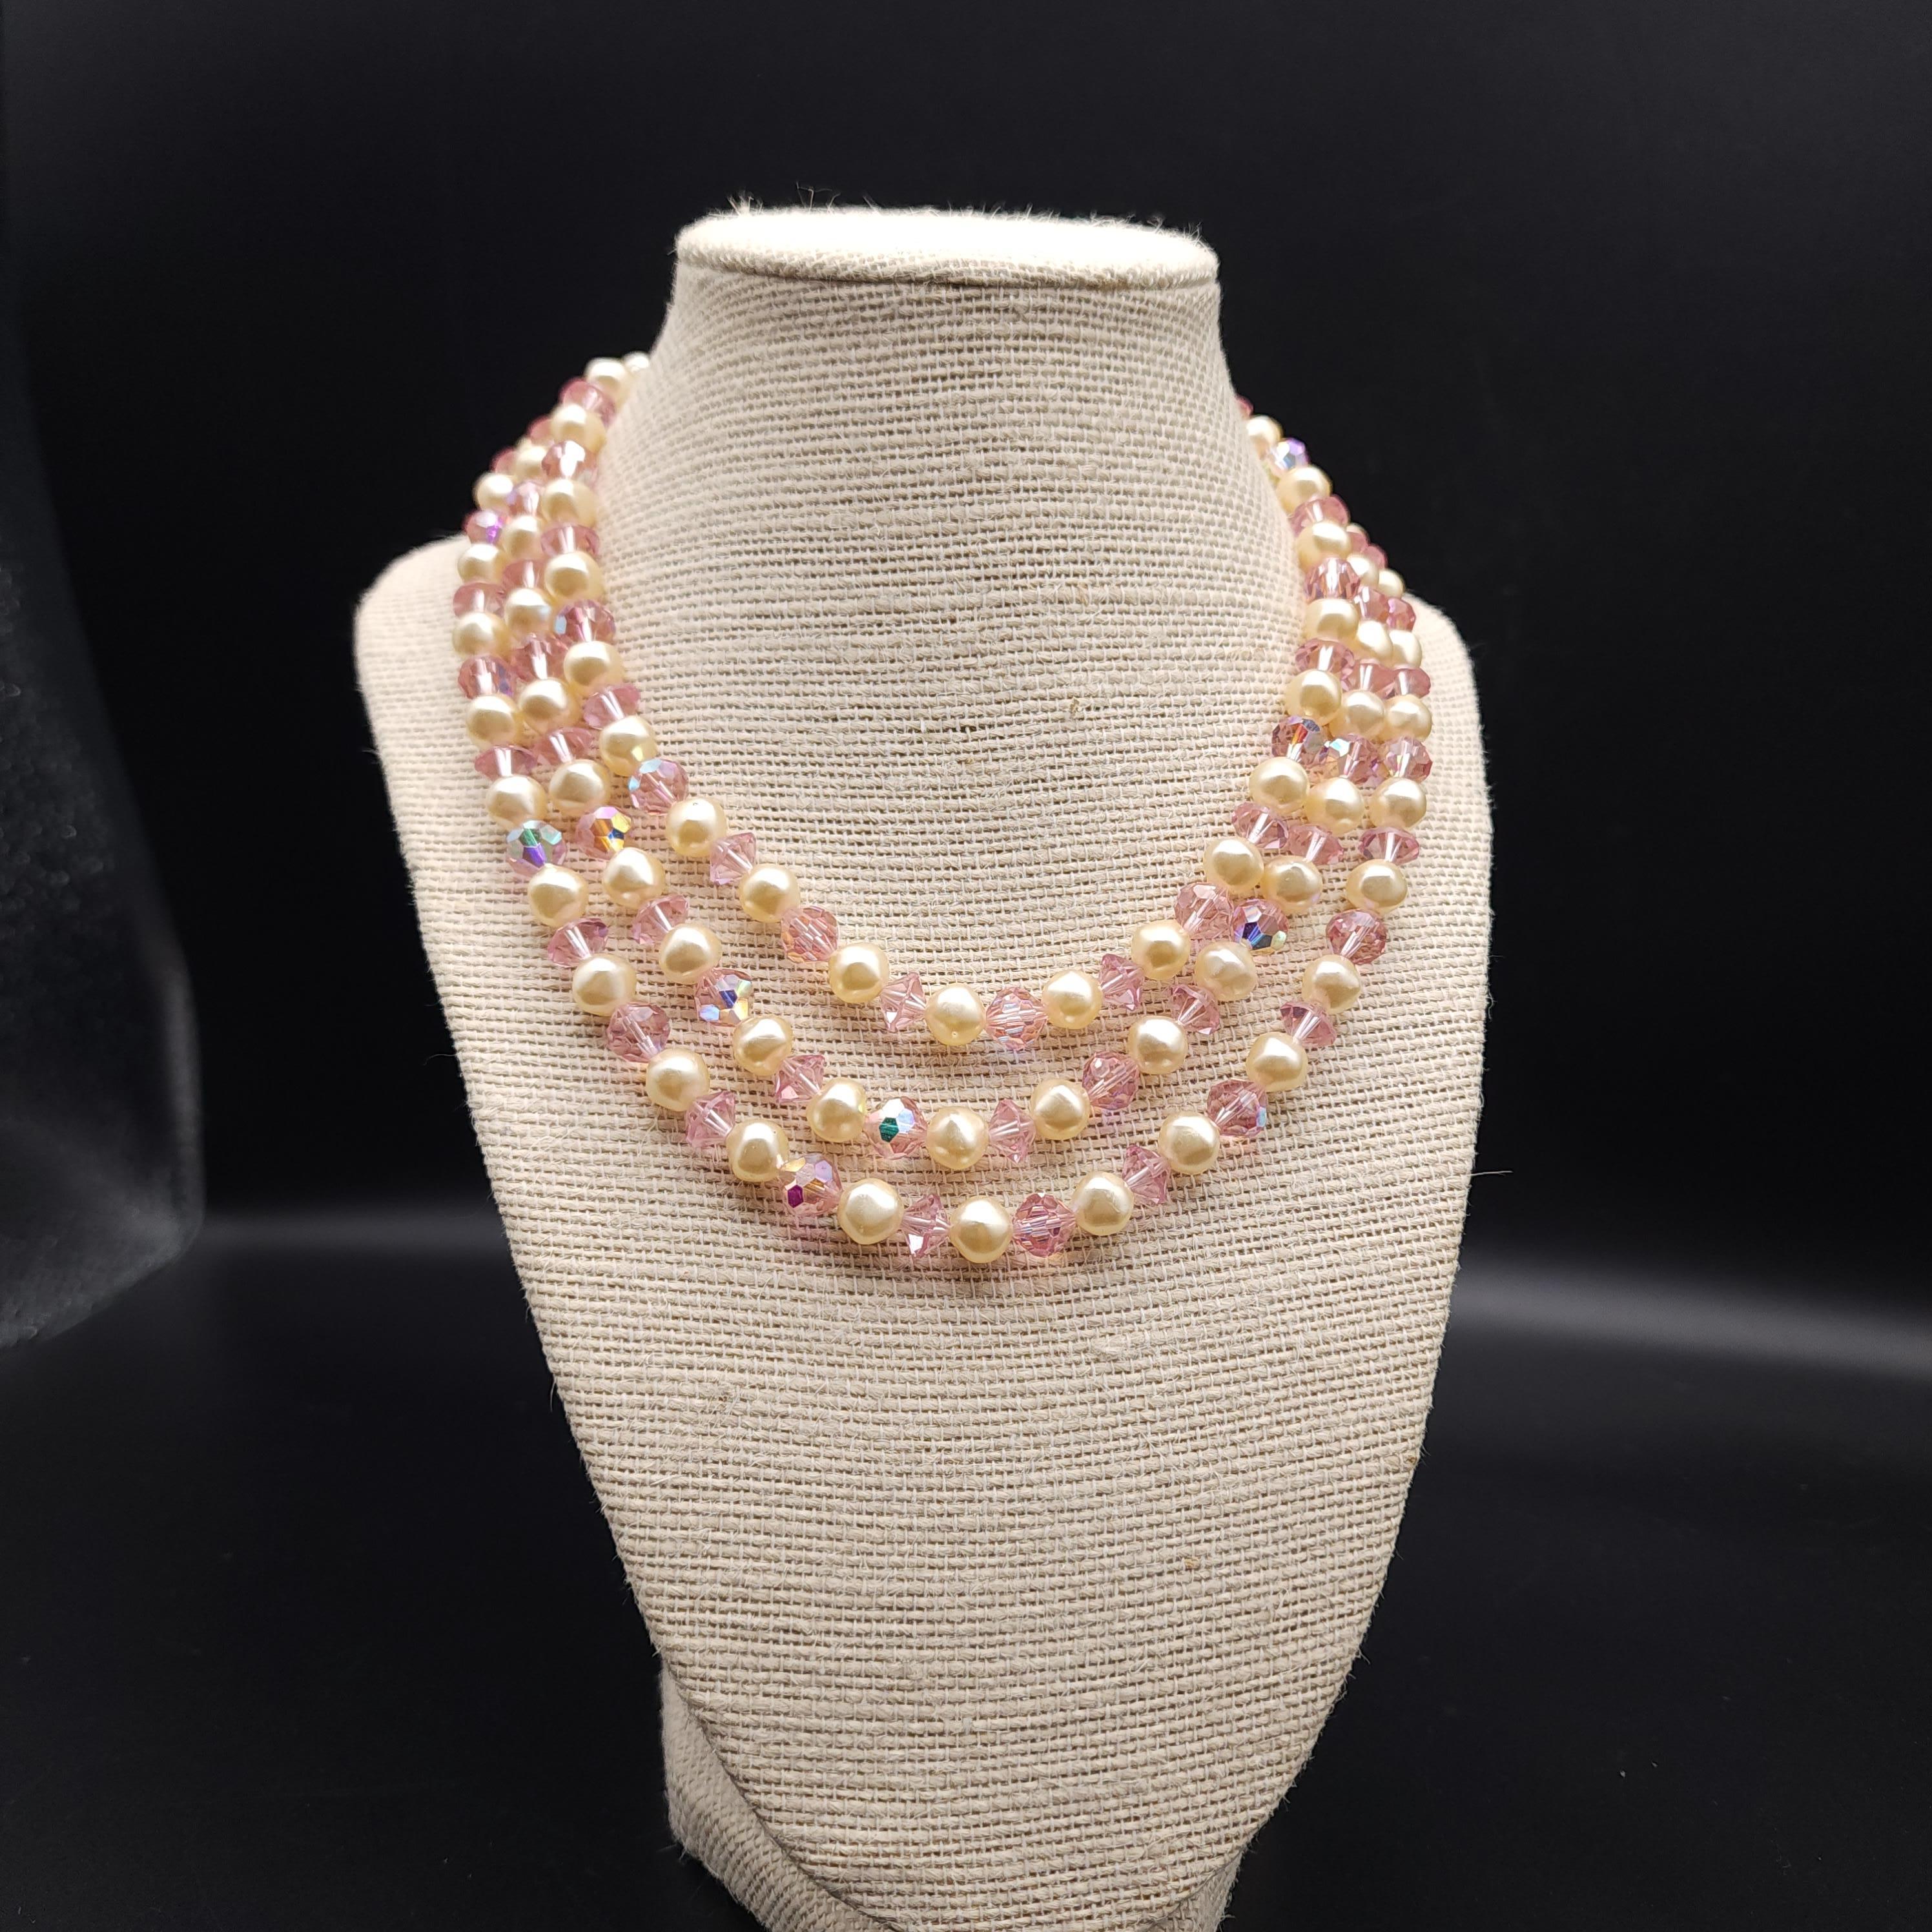 Length: 14.5 inches to 16.5 inches with extension chain
Each faux pearl is approx 1/4 inch / .75 cm

Elevate your ensemble with the timeless elegance of the Laguna rose crystal & faux pearl multi strand necklace. This exquisite vintage piece,